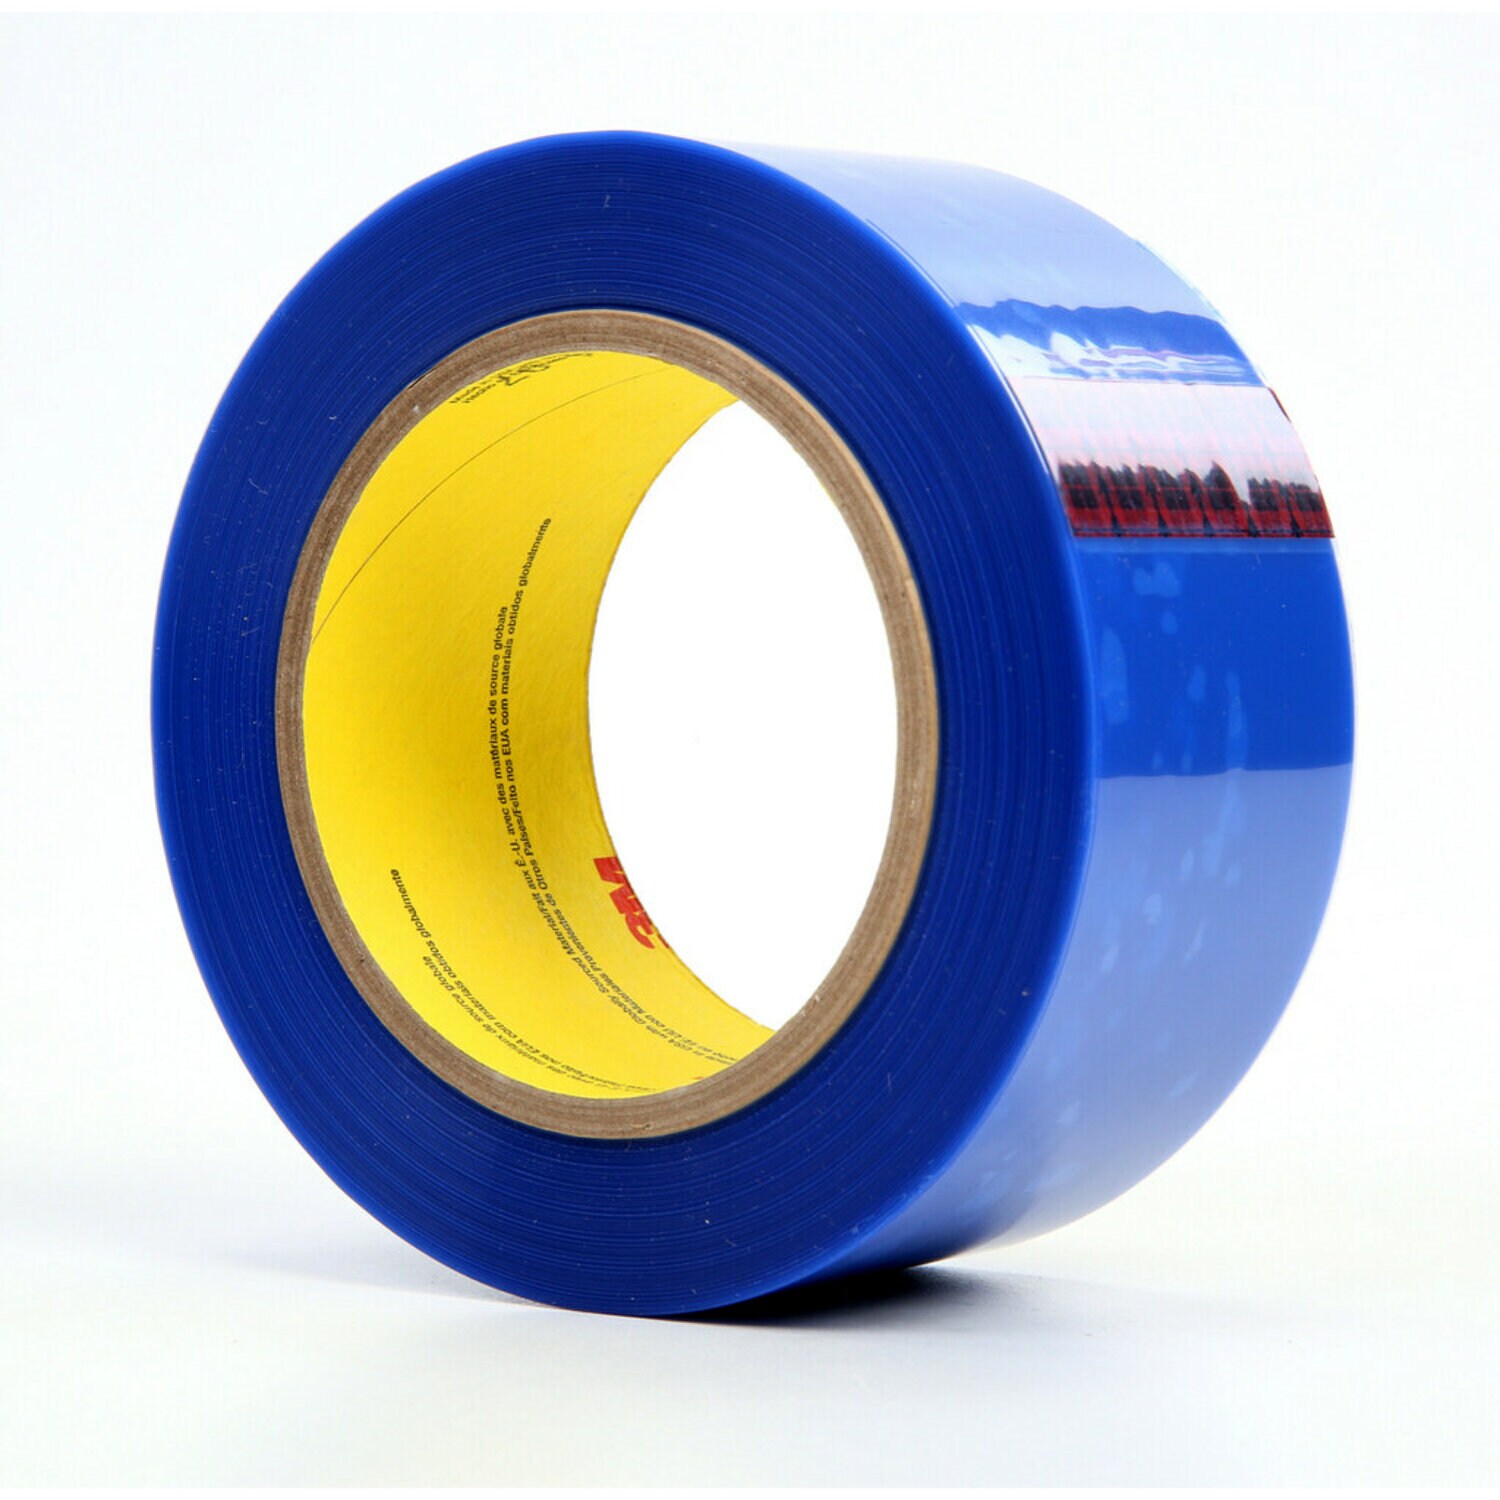 7000049603 - 3M Polyester Tape 8902, Blue, 2 in x 72 yd, 3.4 mil, 24 rolls per case